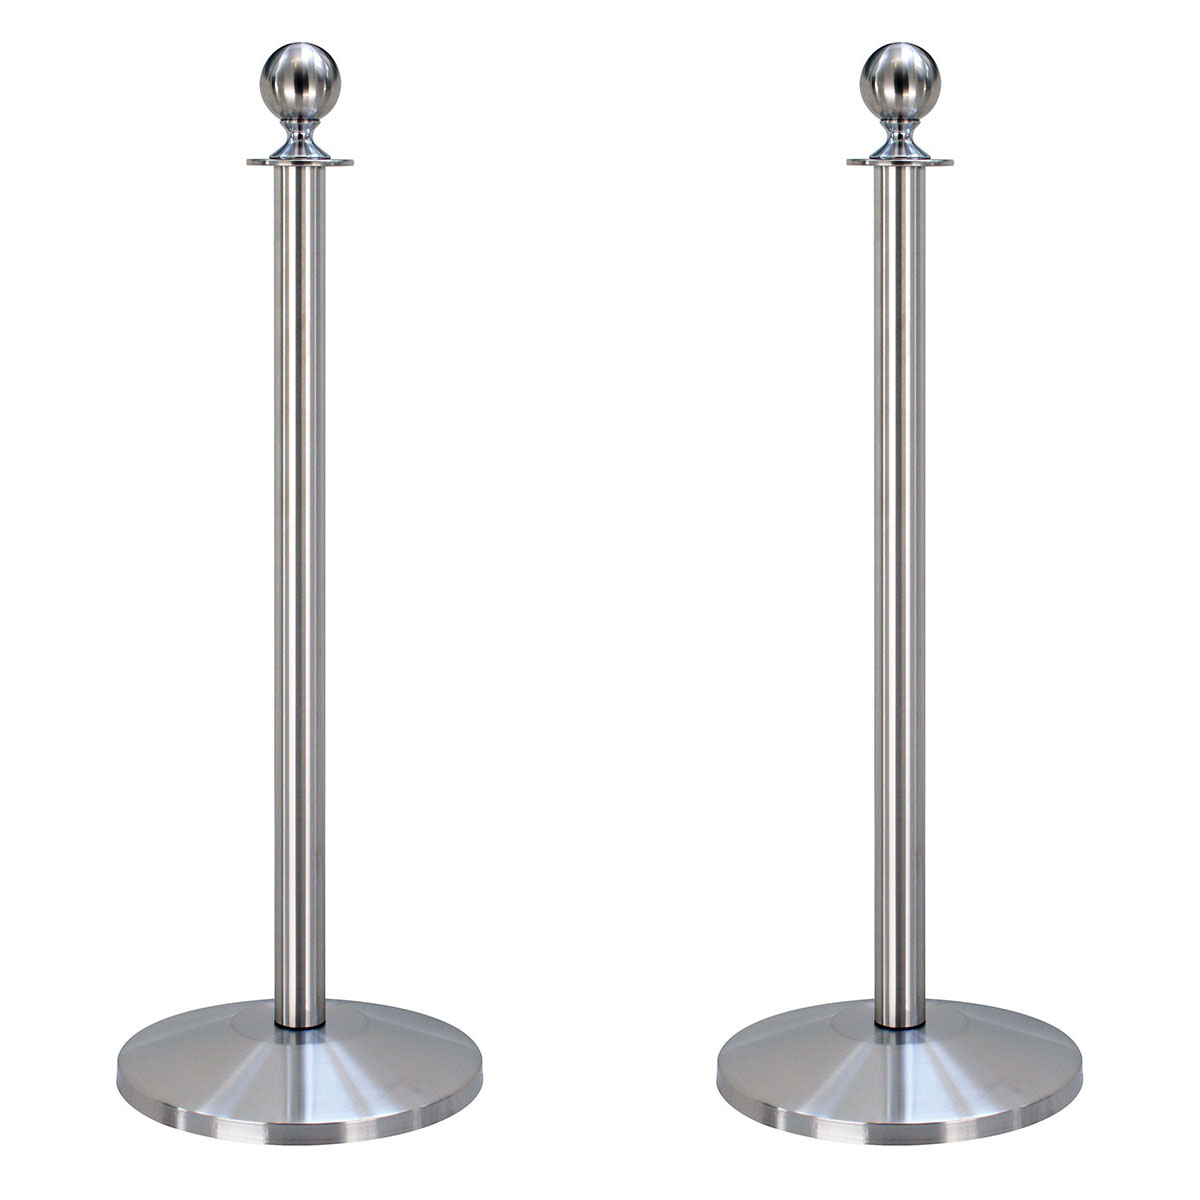 2 Complete Sets of Flat Rope Stanchion